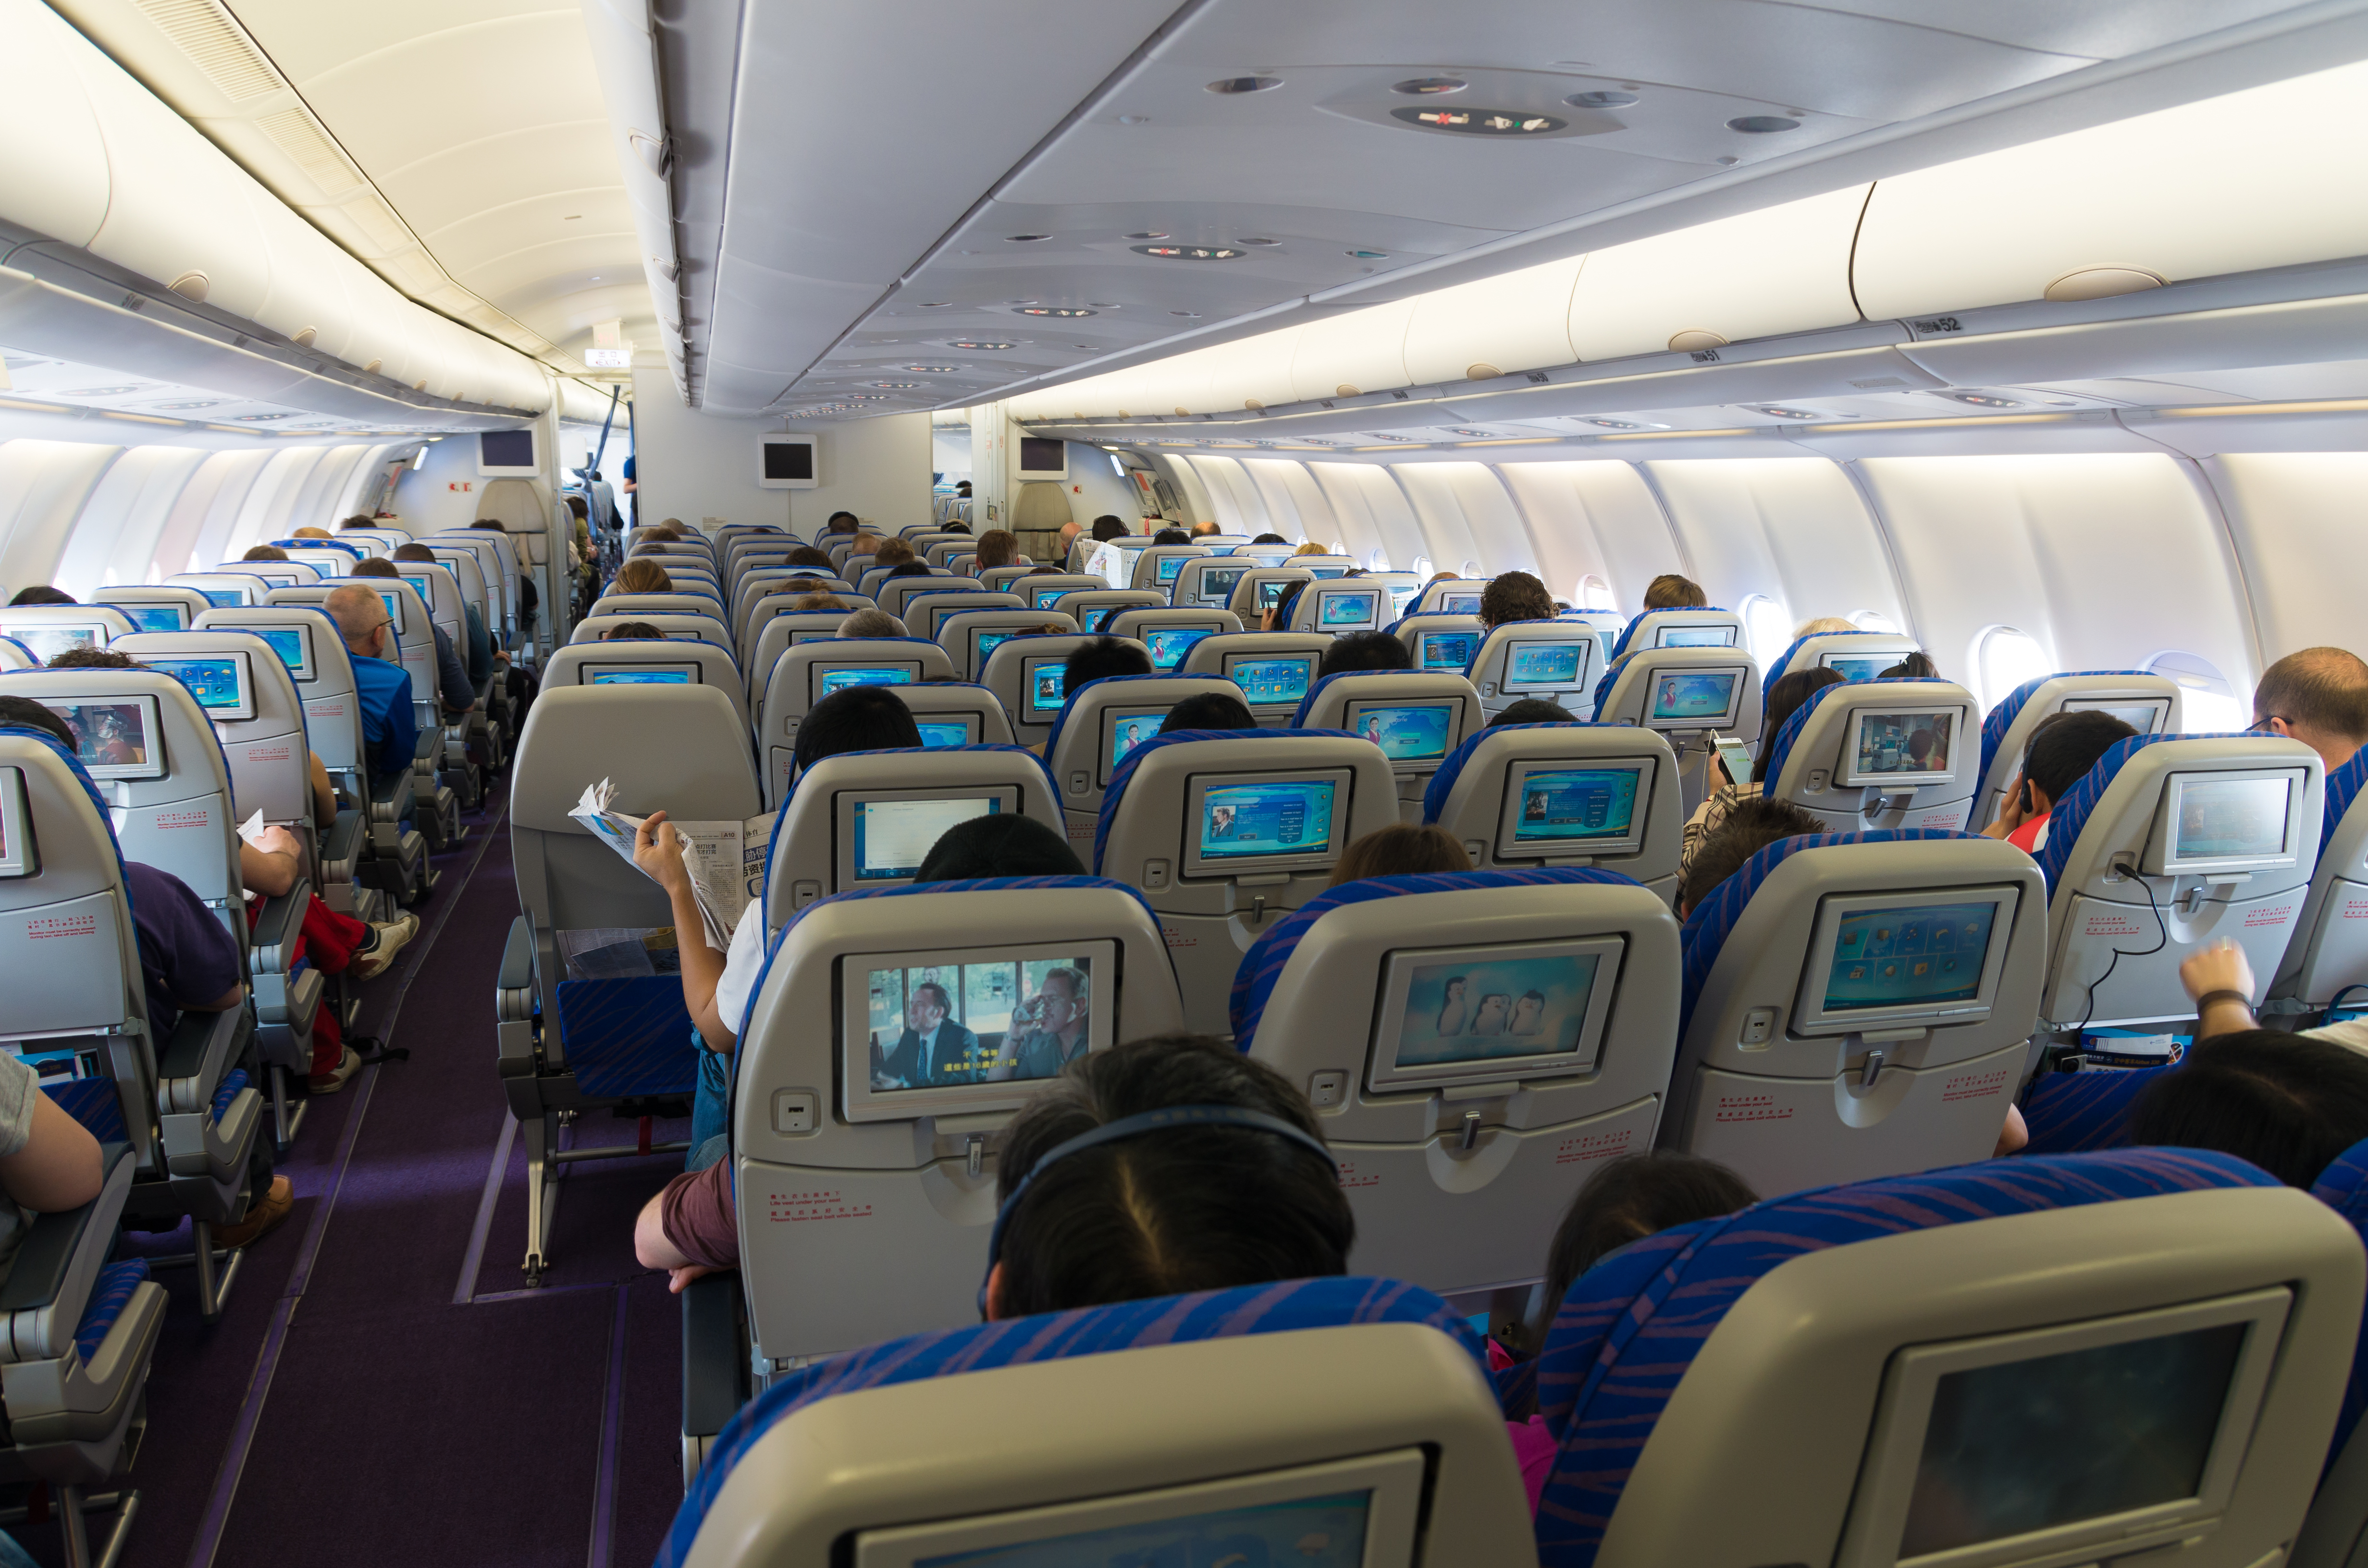 Interior of a China Southern Airlines Company Limited (CSN) commercial airplane, Guangzhou, China, May 10, 2015.